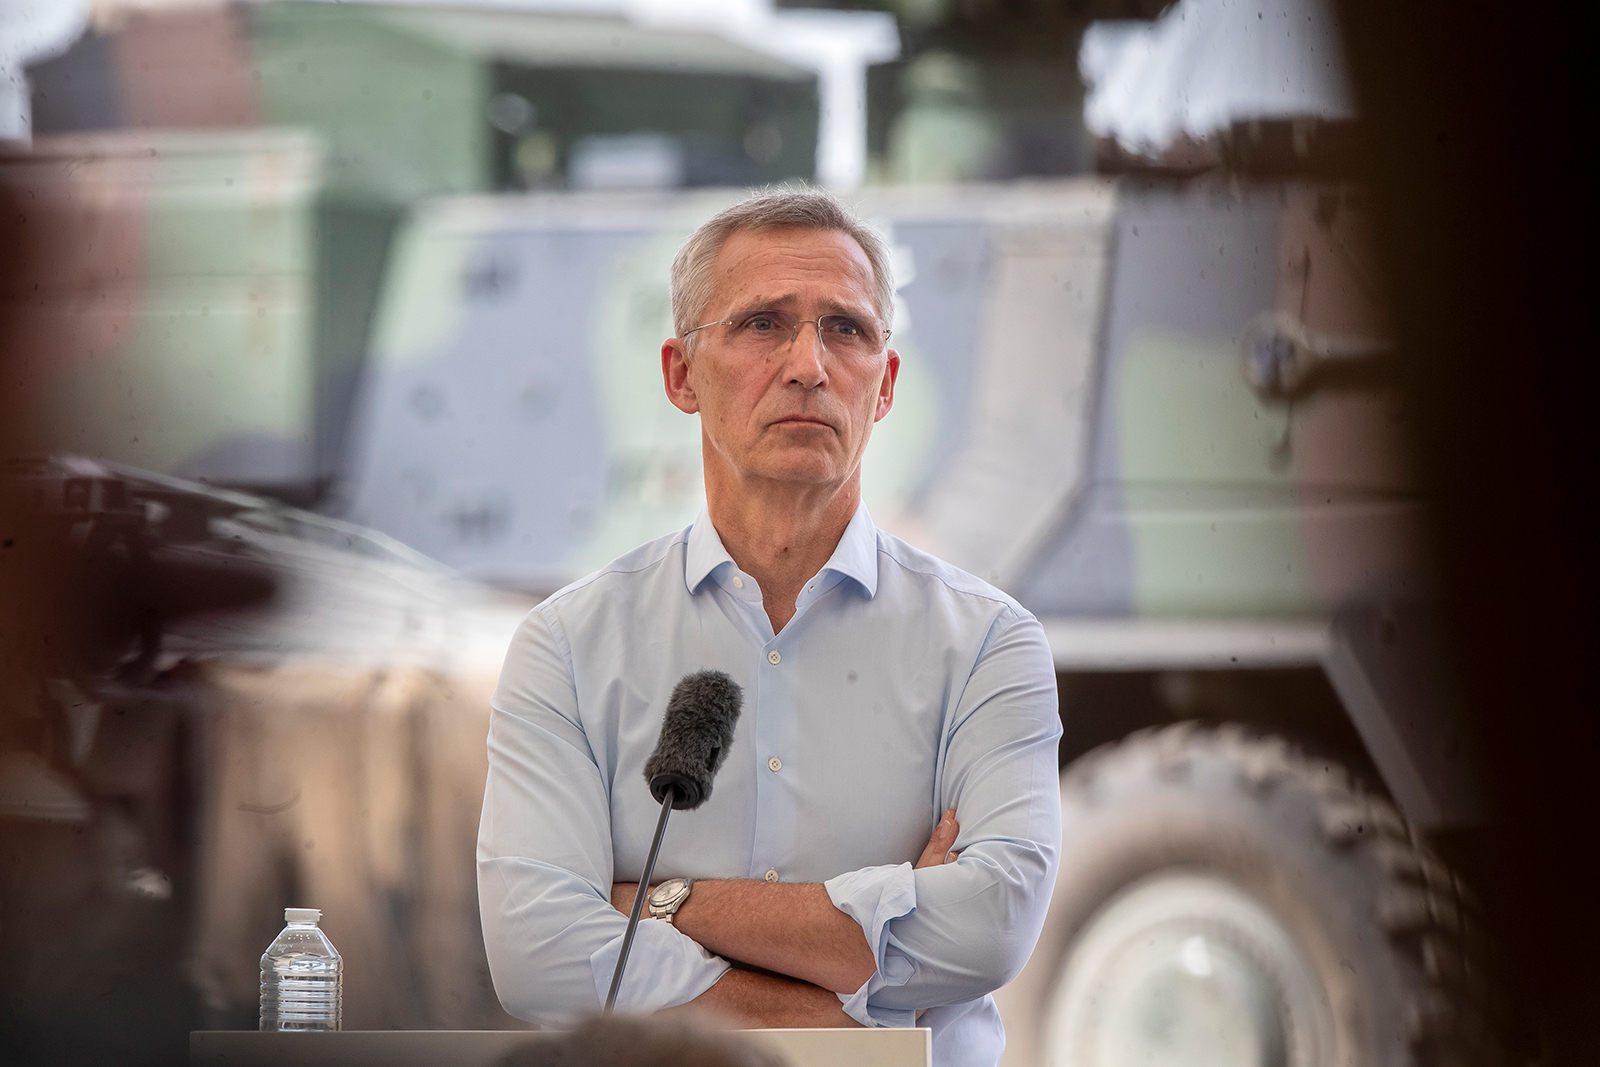 Jens Stoltenberg speaks during a press conference in Pabrade, Lithuania, on June 26.